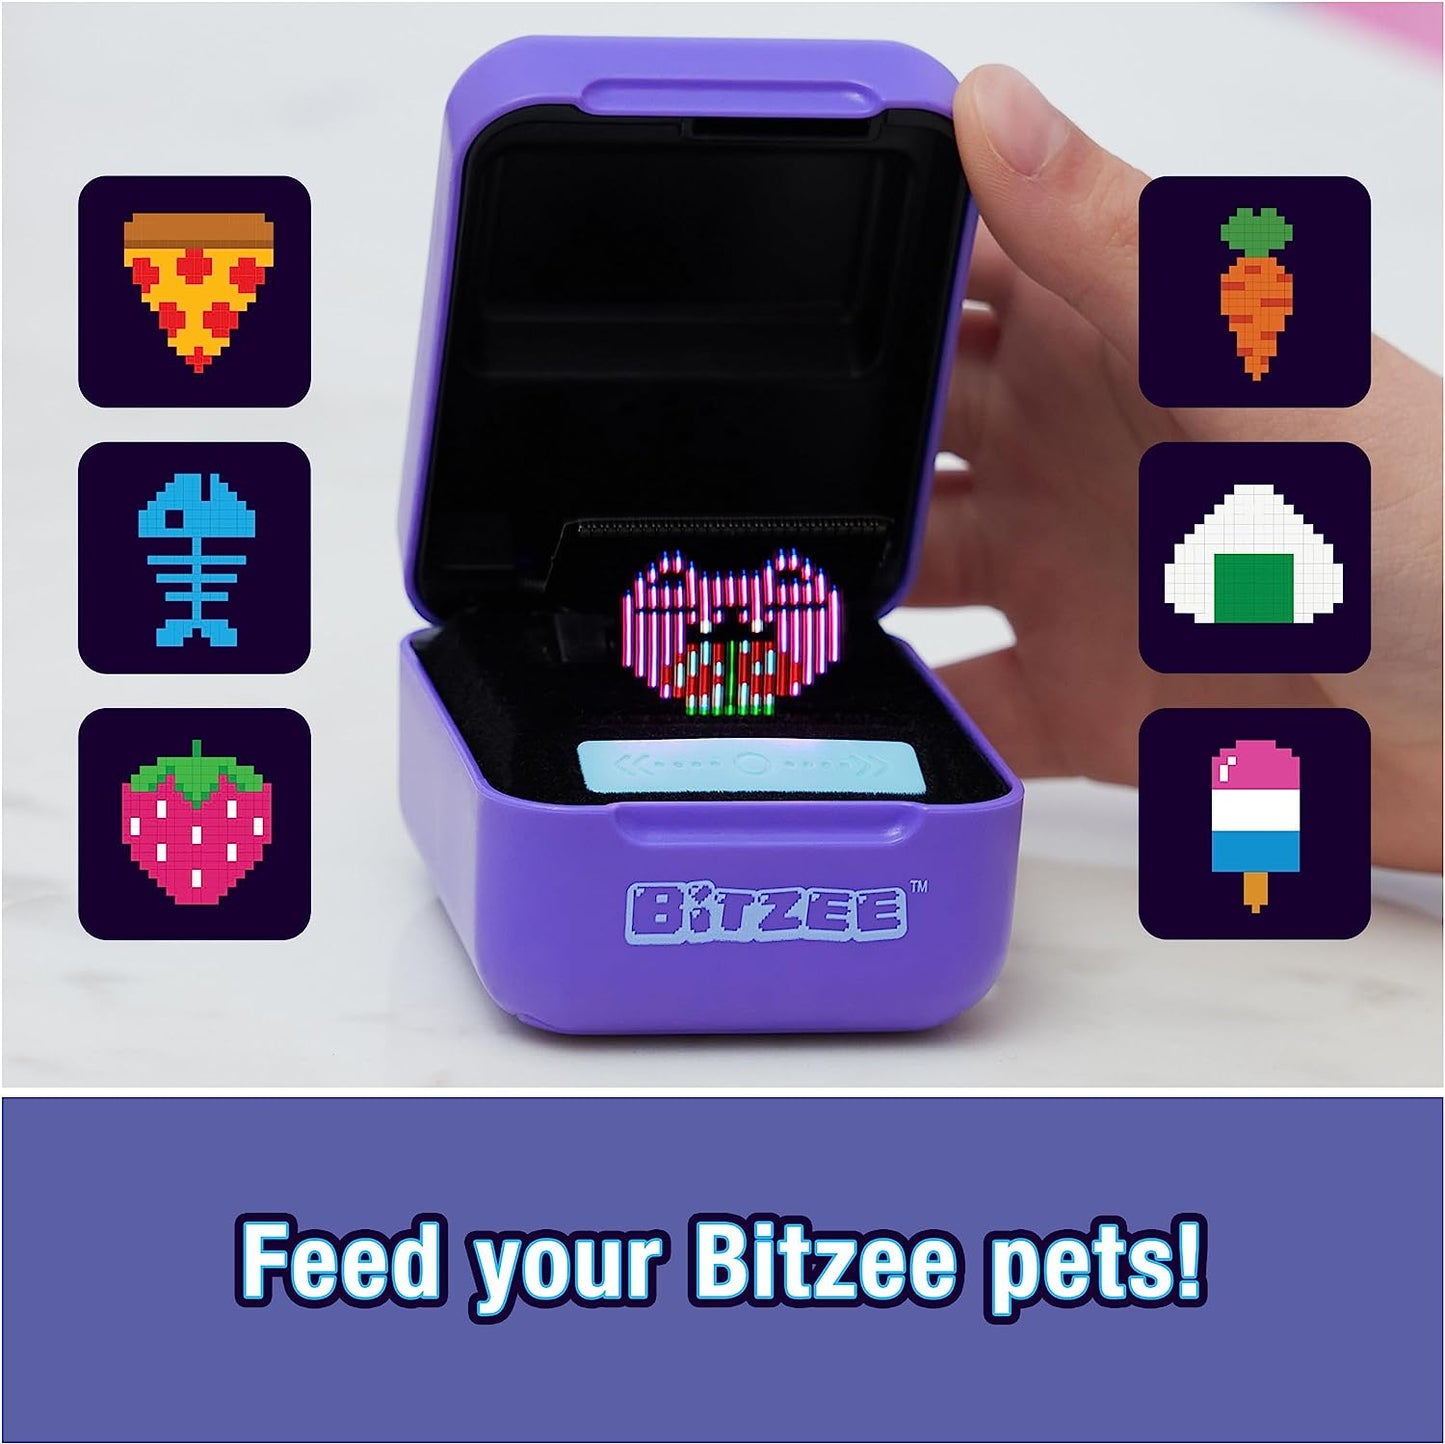 Bitzee, Interactive Toy Digital Pet and Case with 15 Animals Inside, Virtual Electronic Pets React to Touch, Kids Toys for Girls and Boys